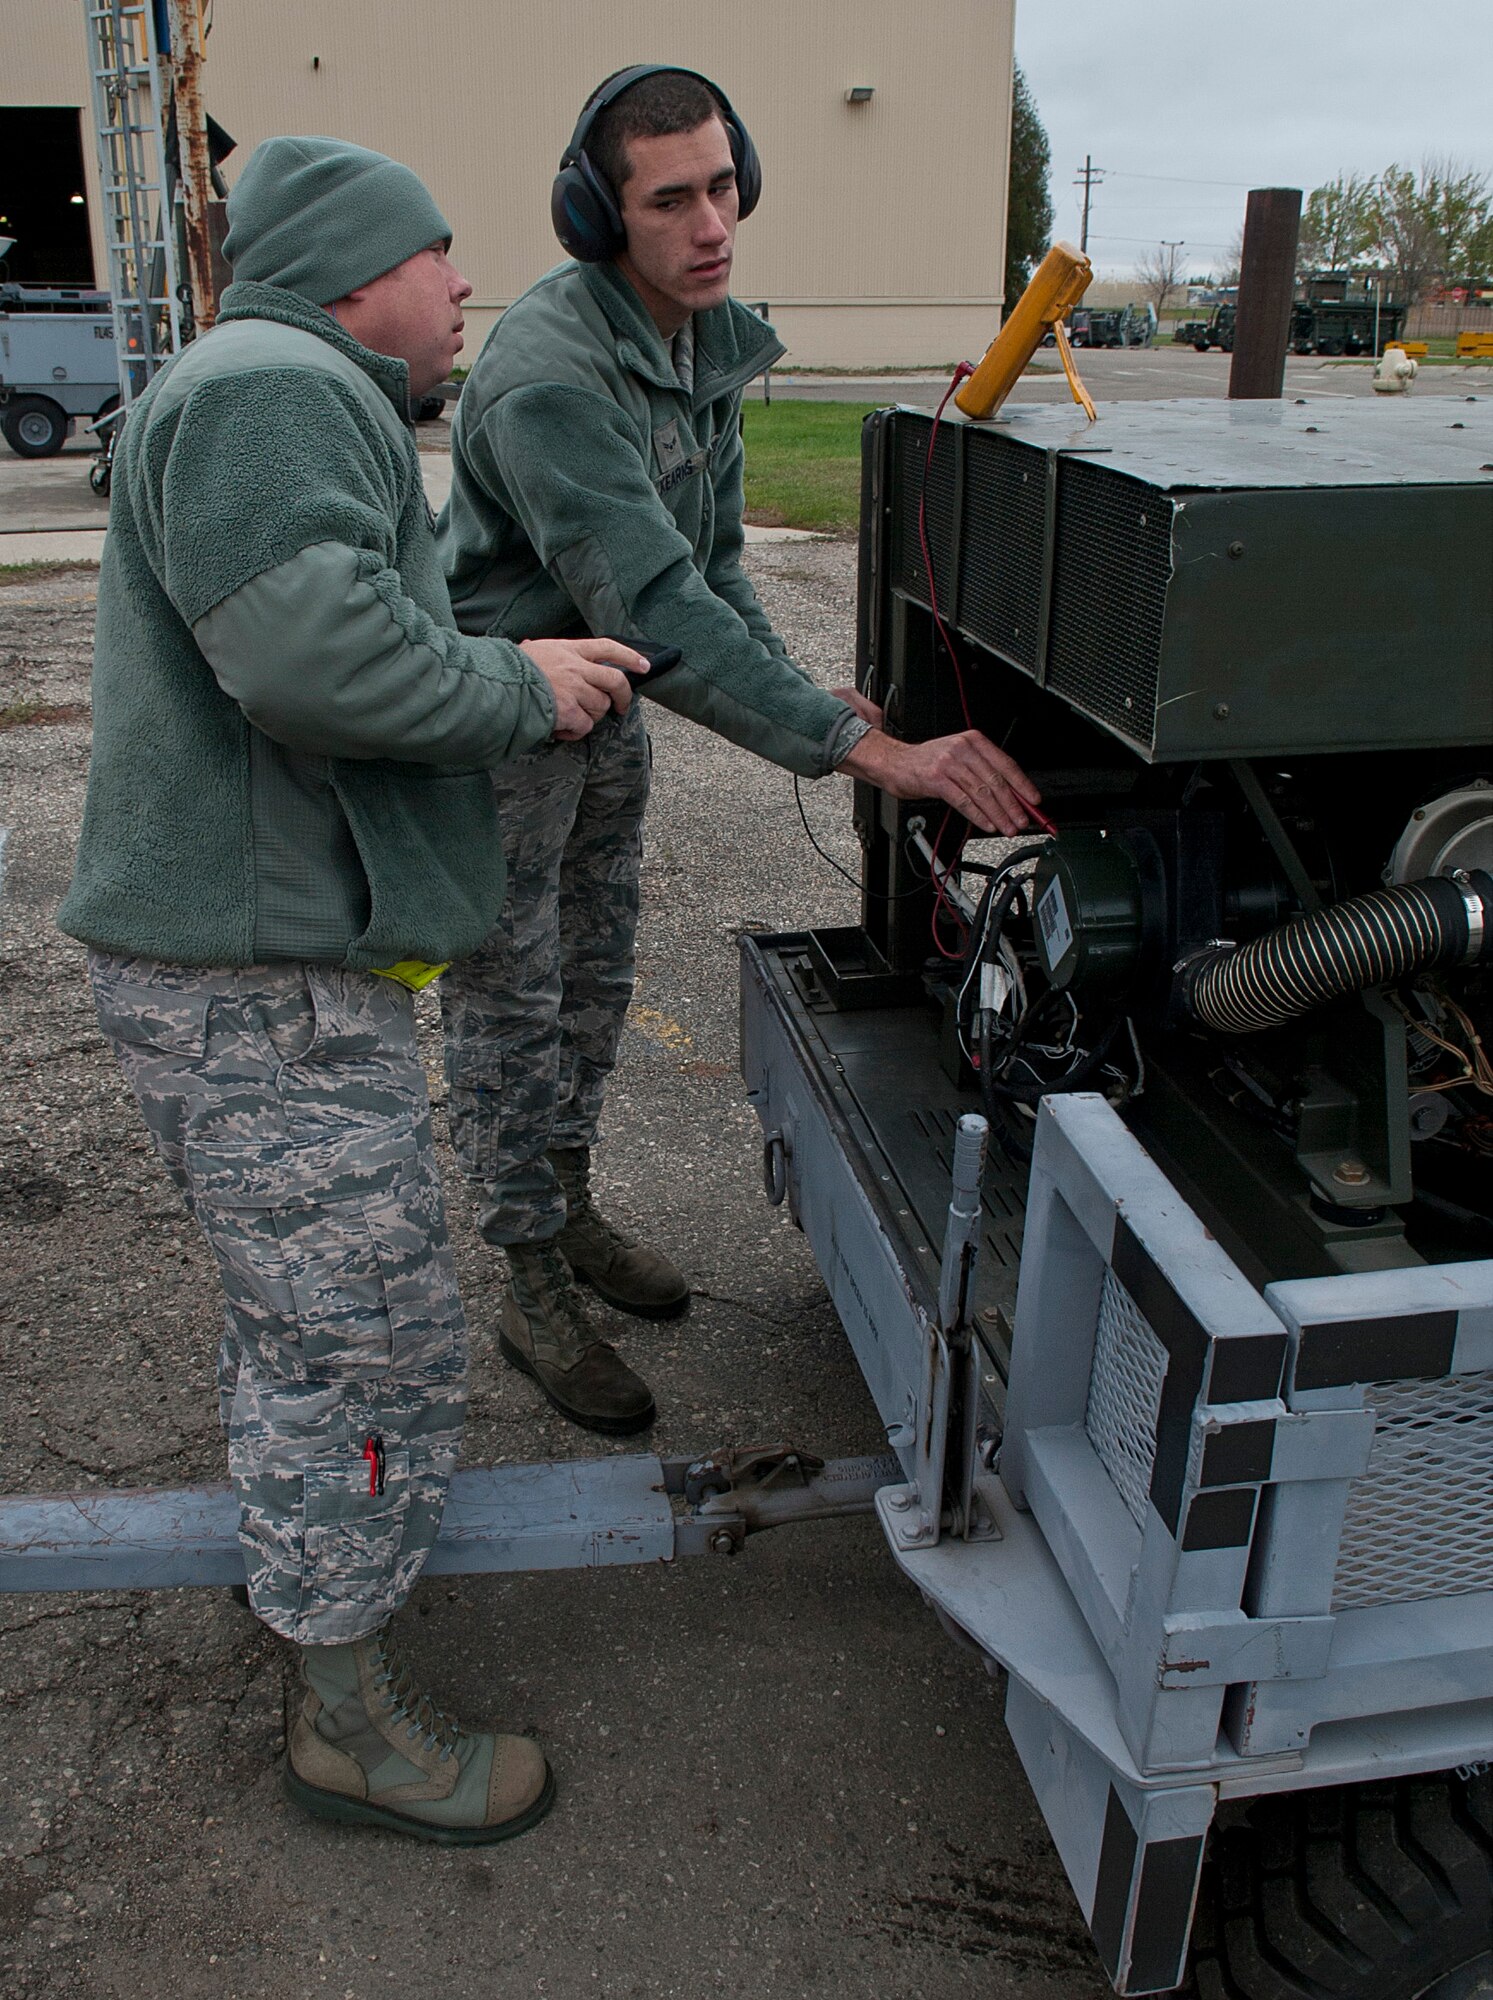 (From left) Staff Sgt. John Dickelman, 5th Maintenance Squadron aerospace ground equipment craftsman and Airman 1st Class Michael Kearns, 5 MXS AGE apprentice, check the voltage on a generator at Minot Air Force Base, N.D., Oct. 5, 2016. The AGE Airmen are responsible for ensuring all generators on base are serviceable. (U.S. Air Force photo/Airman 1st Class Jonathan McElderry)  